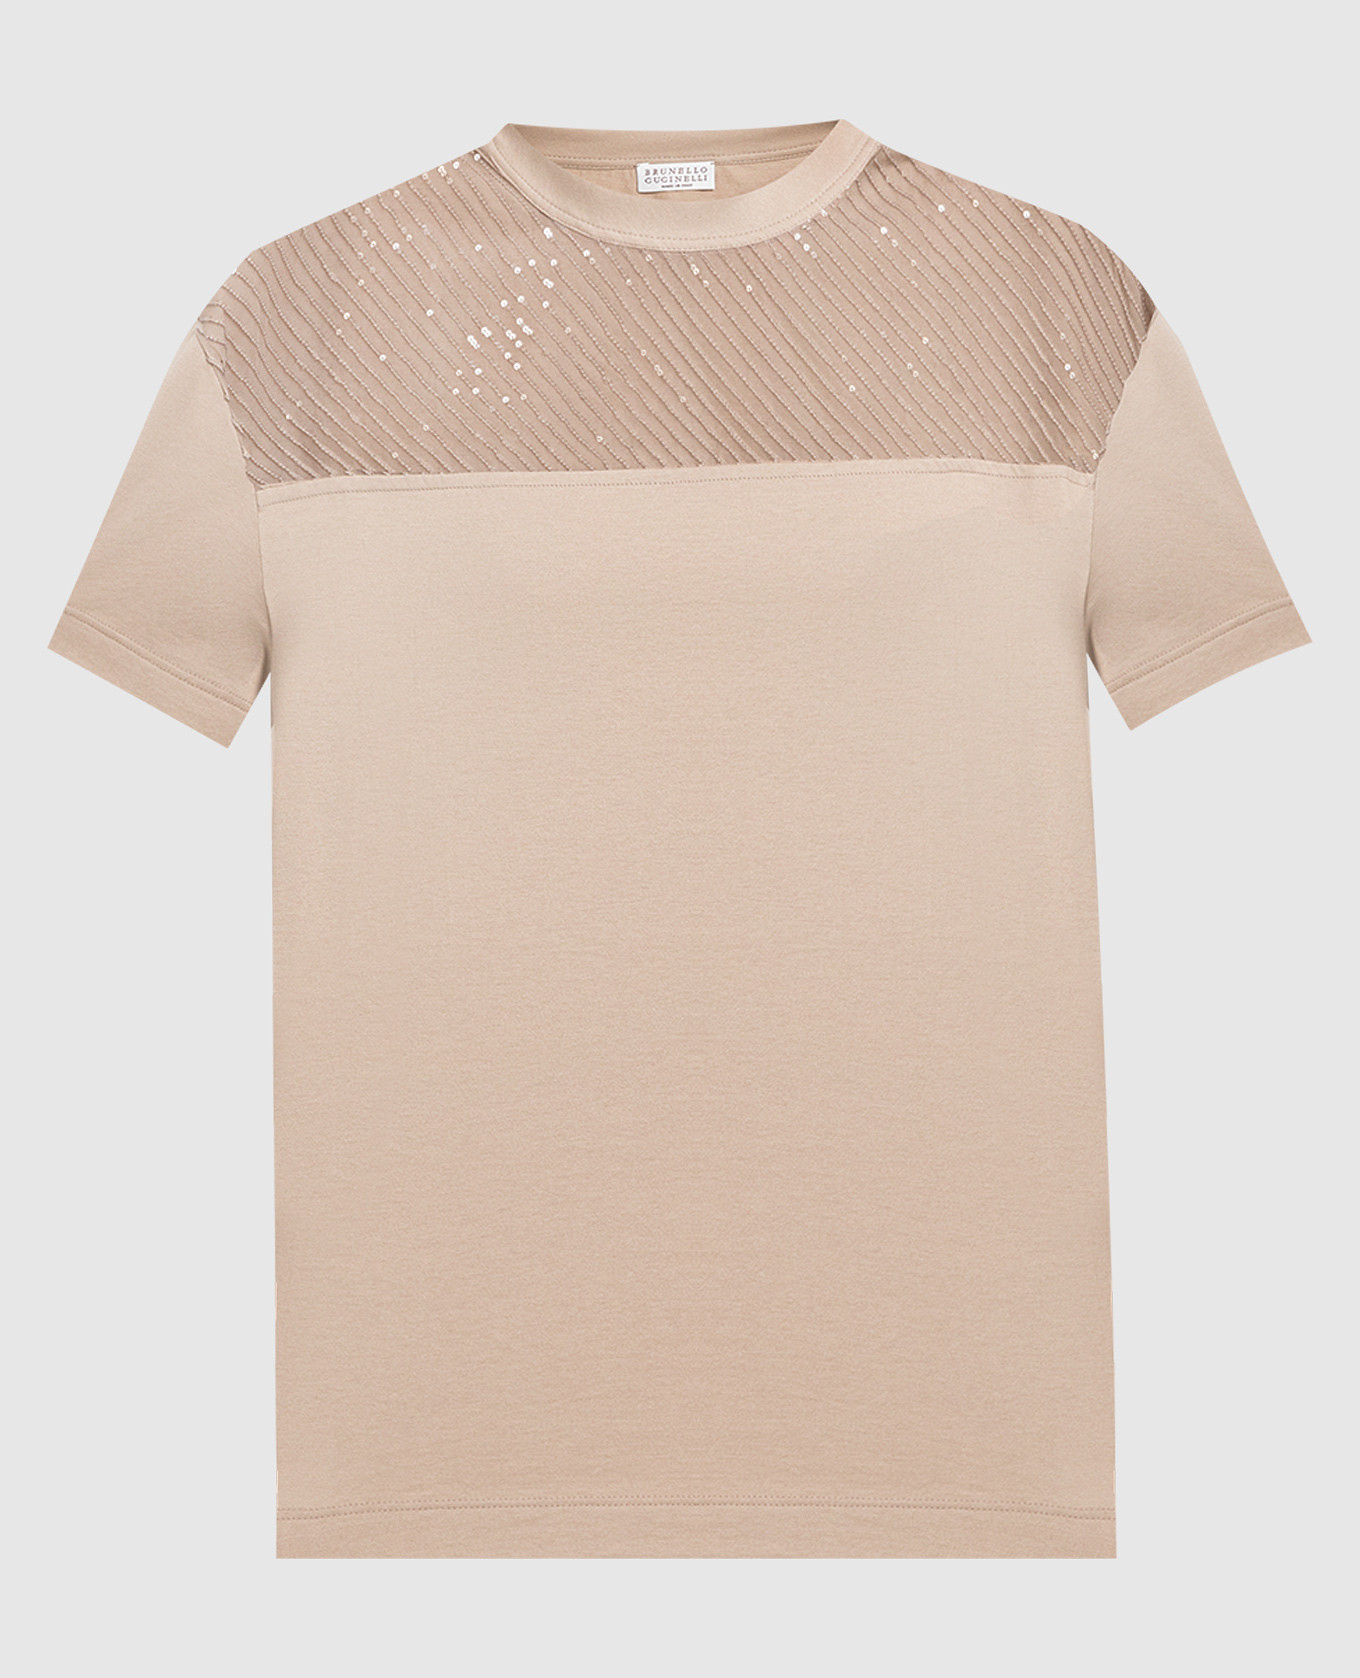 Brown t-shirt with sequins